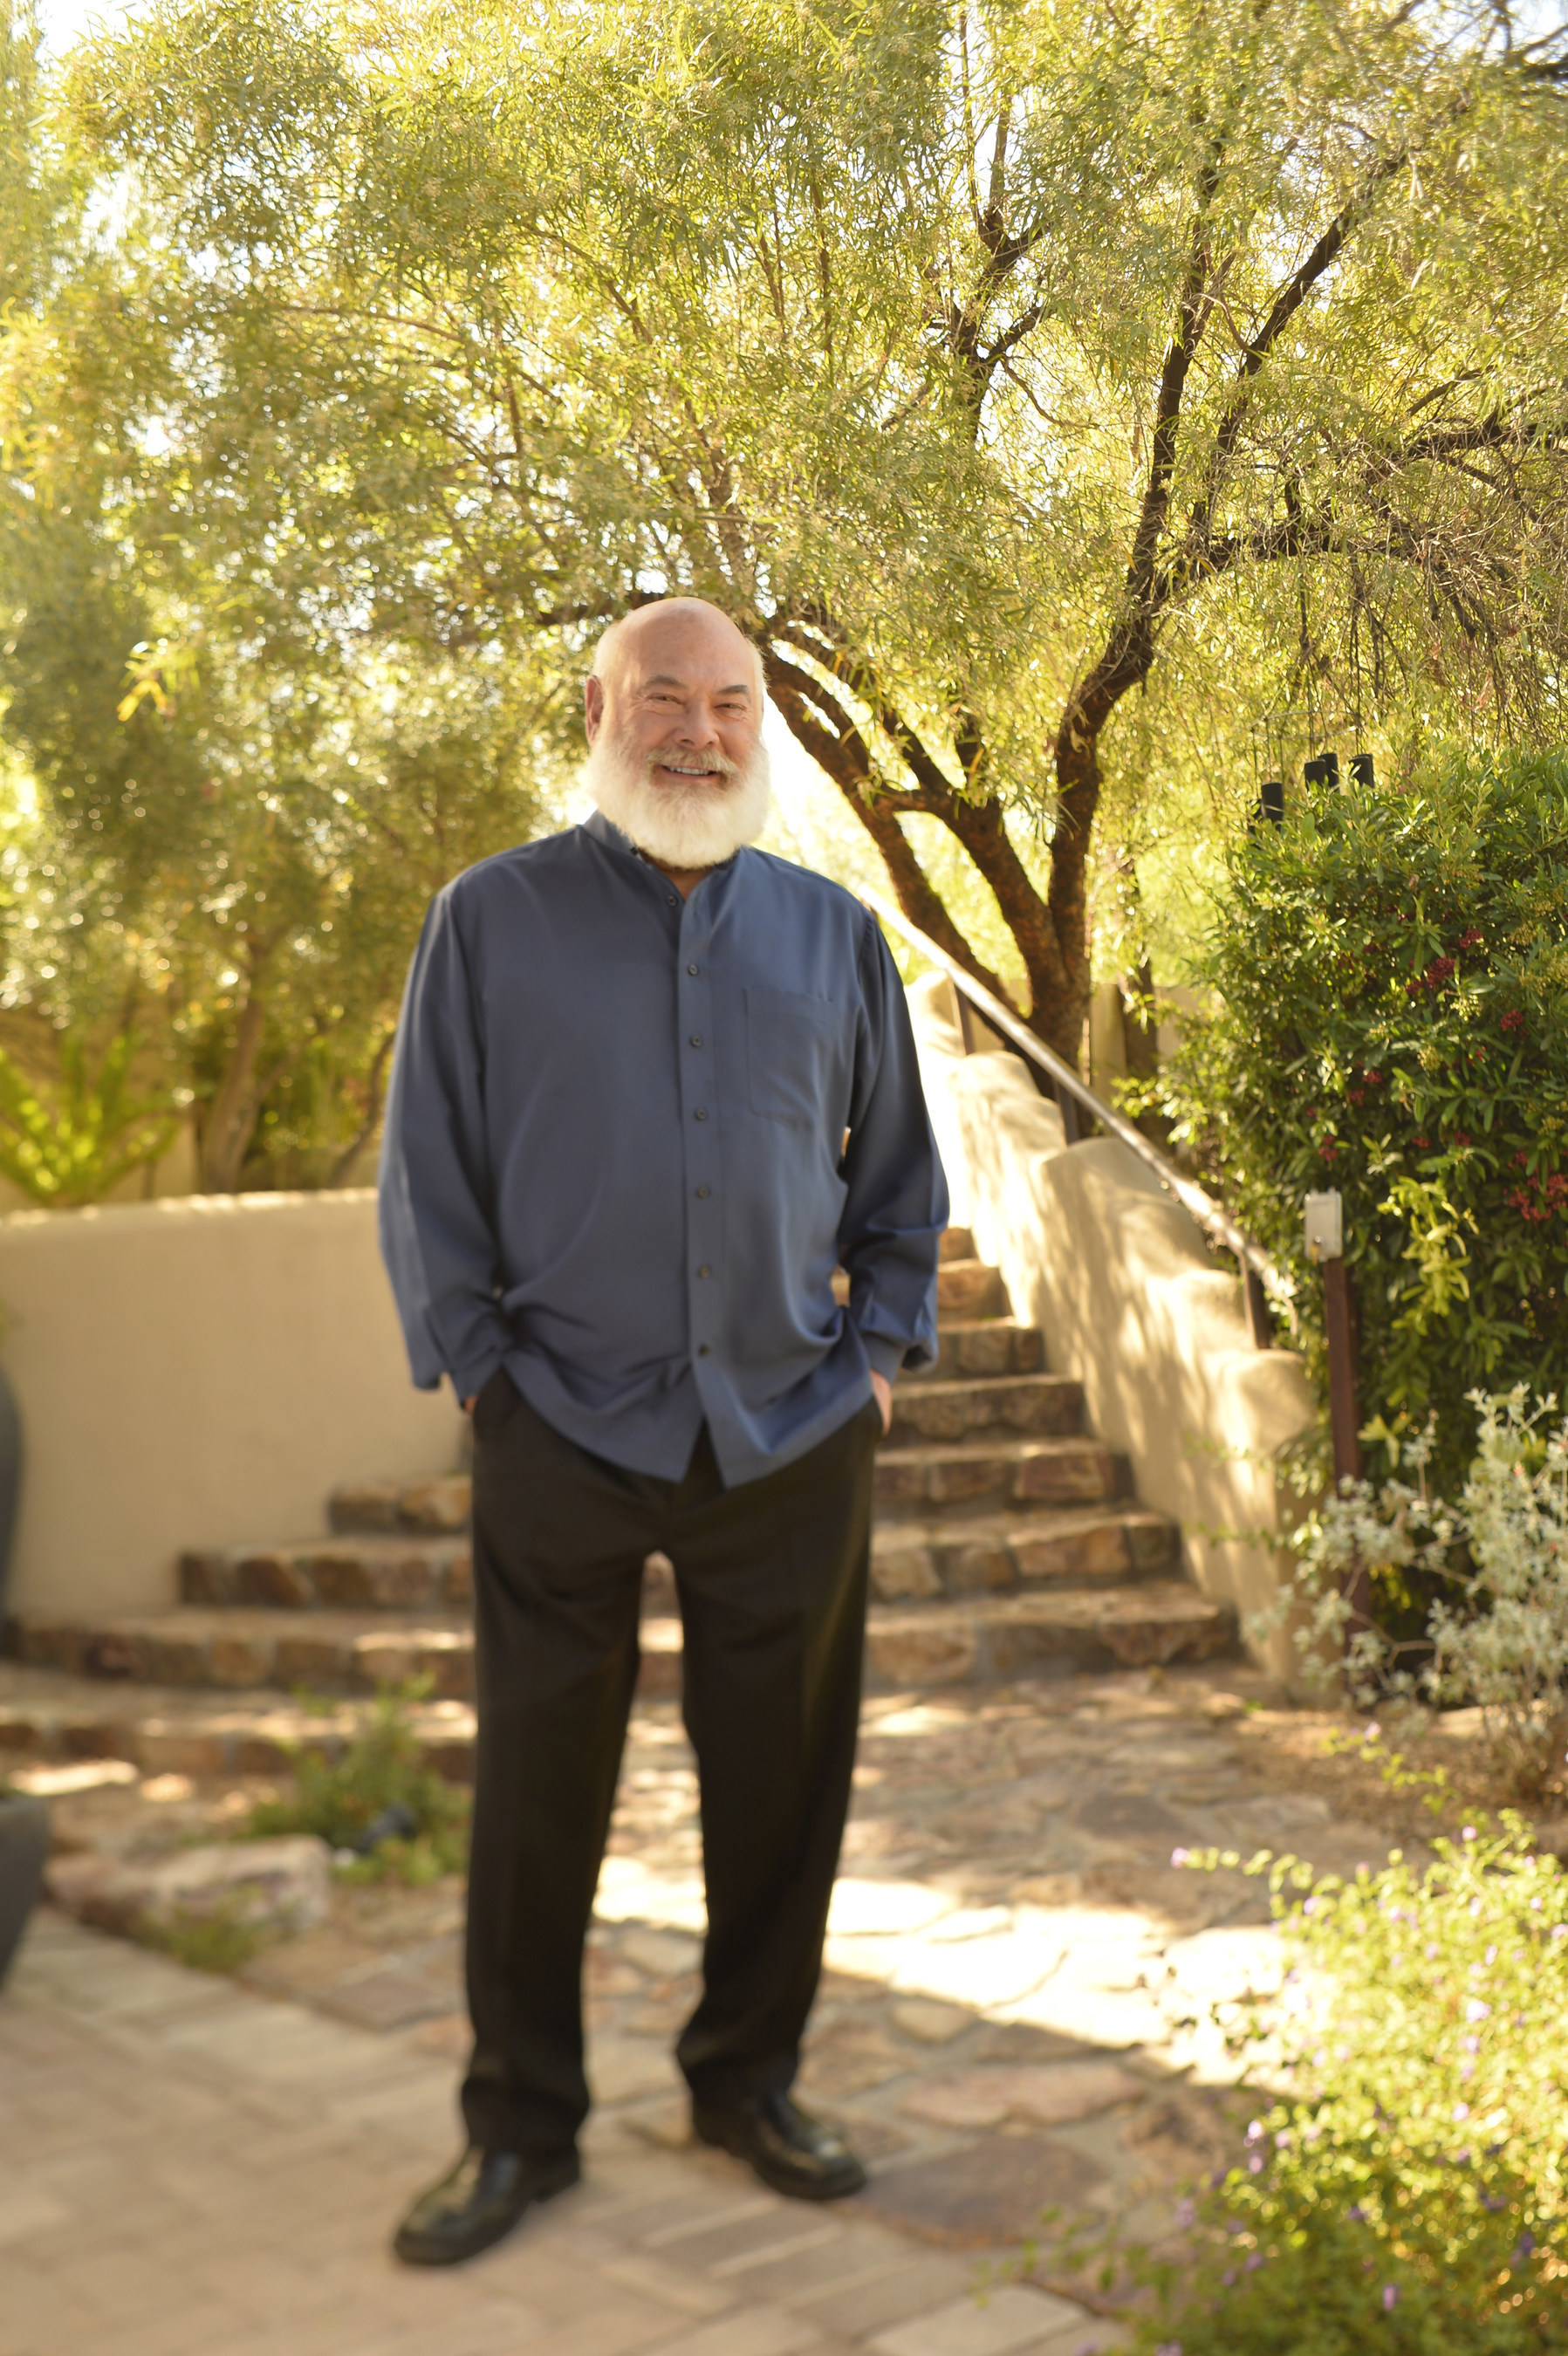 Seabourn Partners with Integrative Medicine Pioneer, Dr. Andrew Weil, to Offer Spa and Wellness Programs Aboard Luxury Fleet